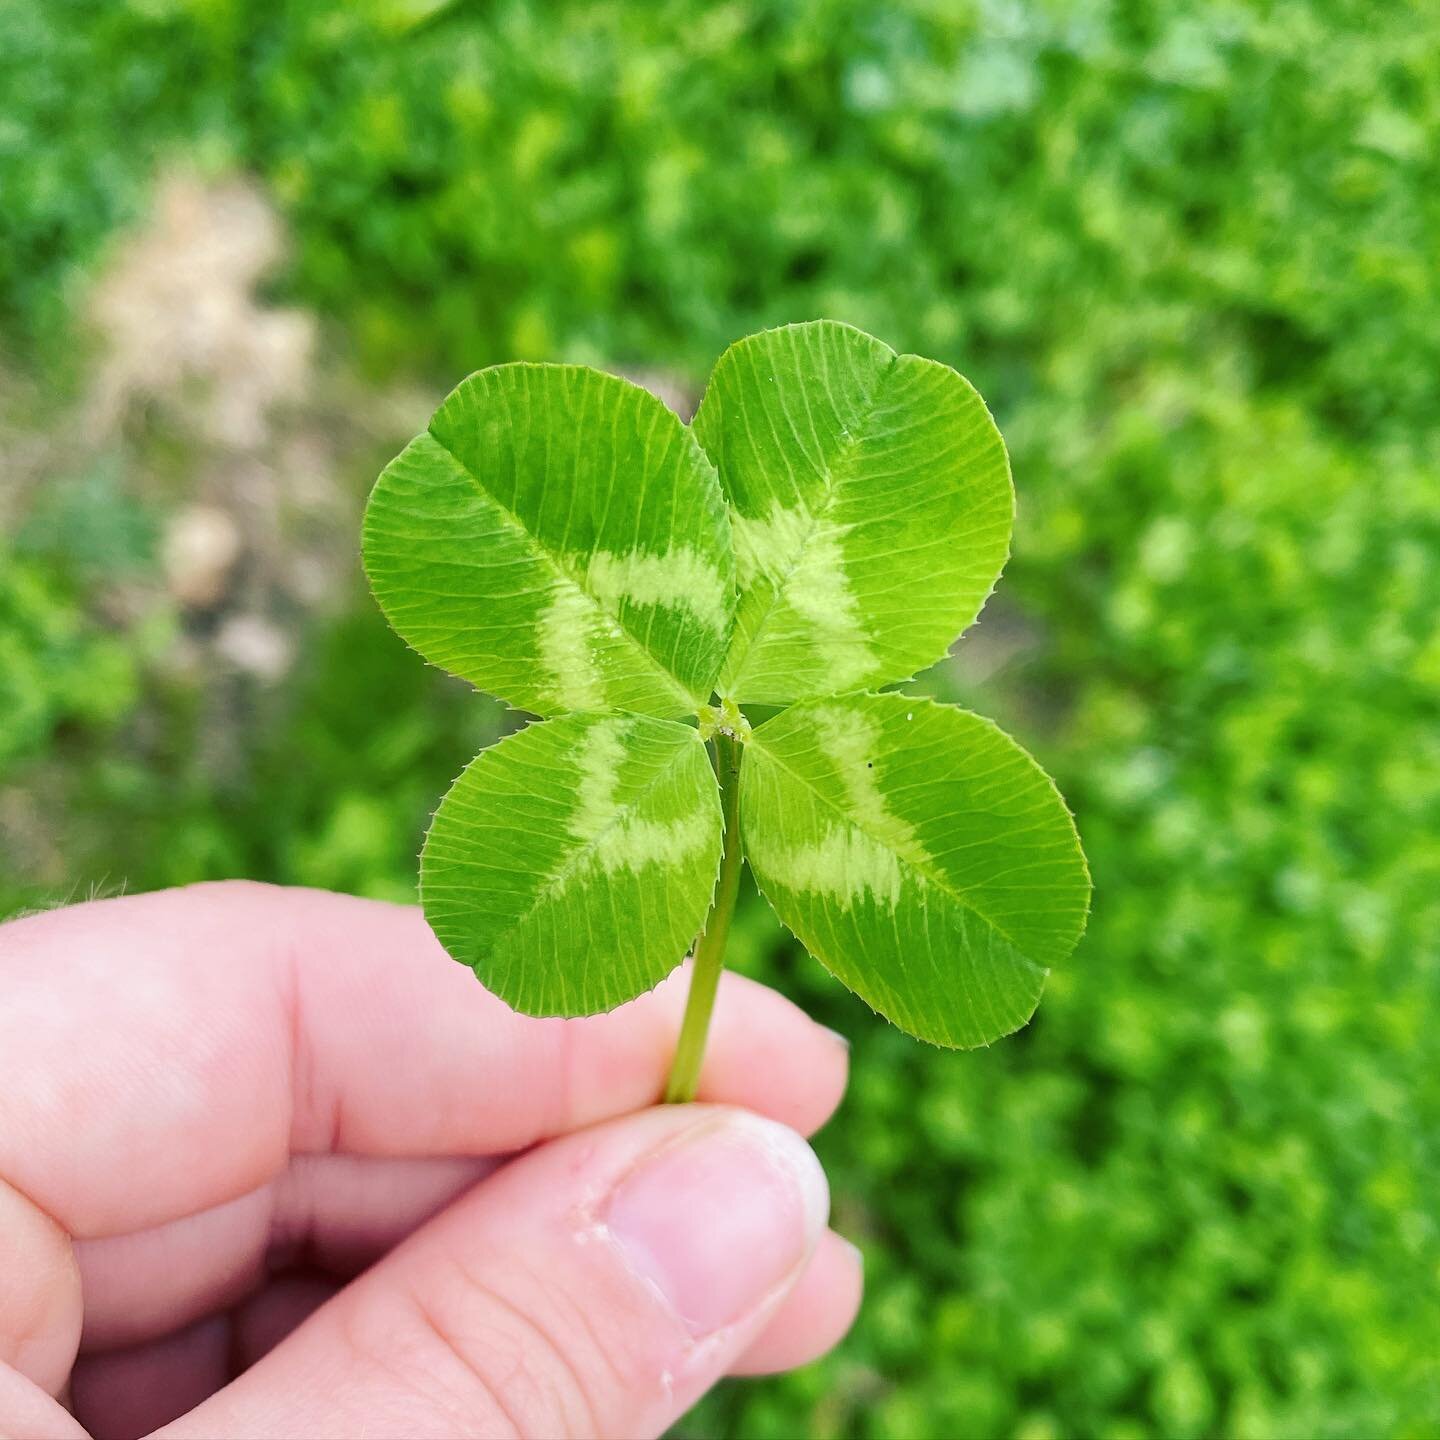 It&rsquo;s been a weird summer for clover hunting. A bad drought and hot weather destroyed a lot of my patches right when they usually peak. I haven&rsquo;t collected much in the last couple months. Only 35 days and 7,002 clovers (200/day avg) compar